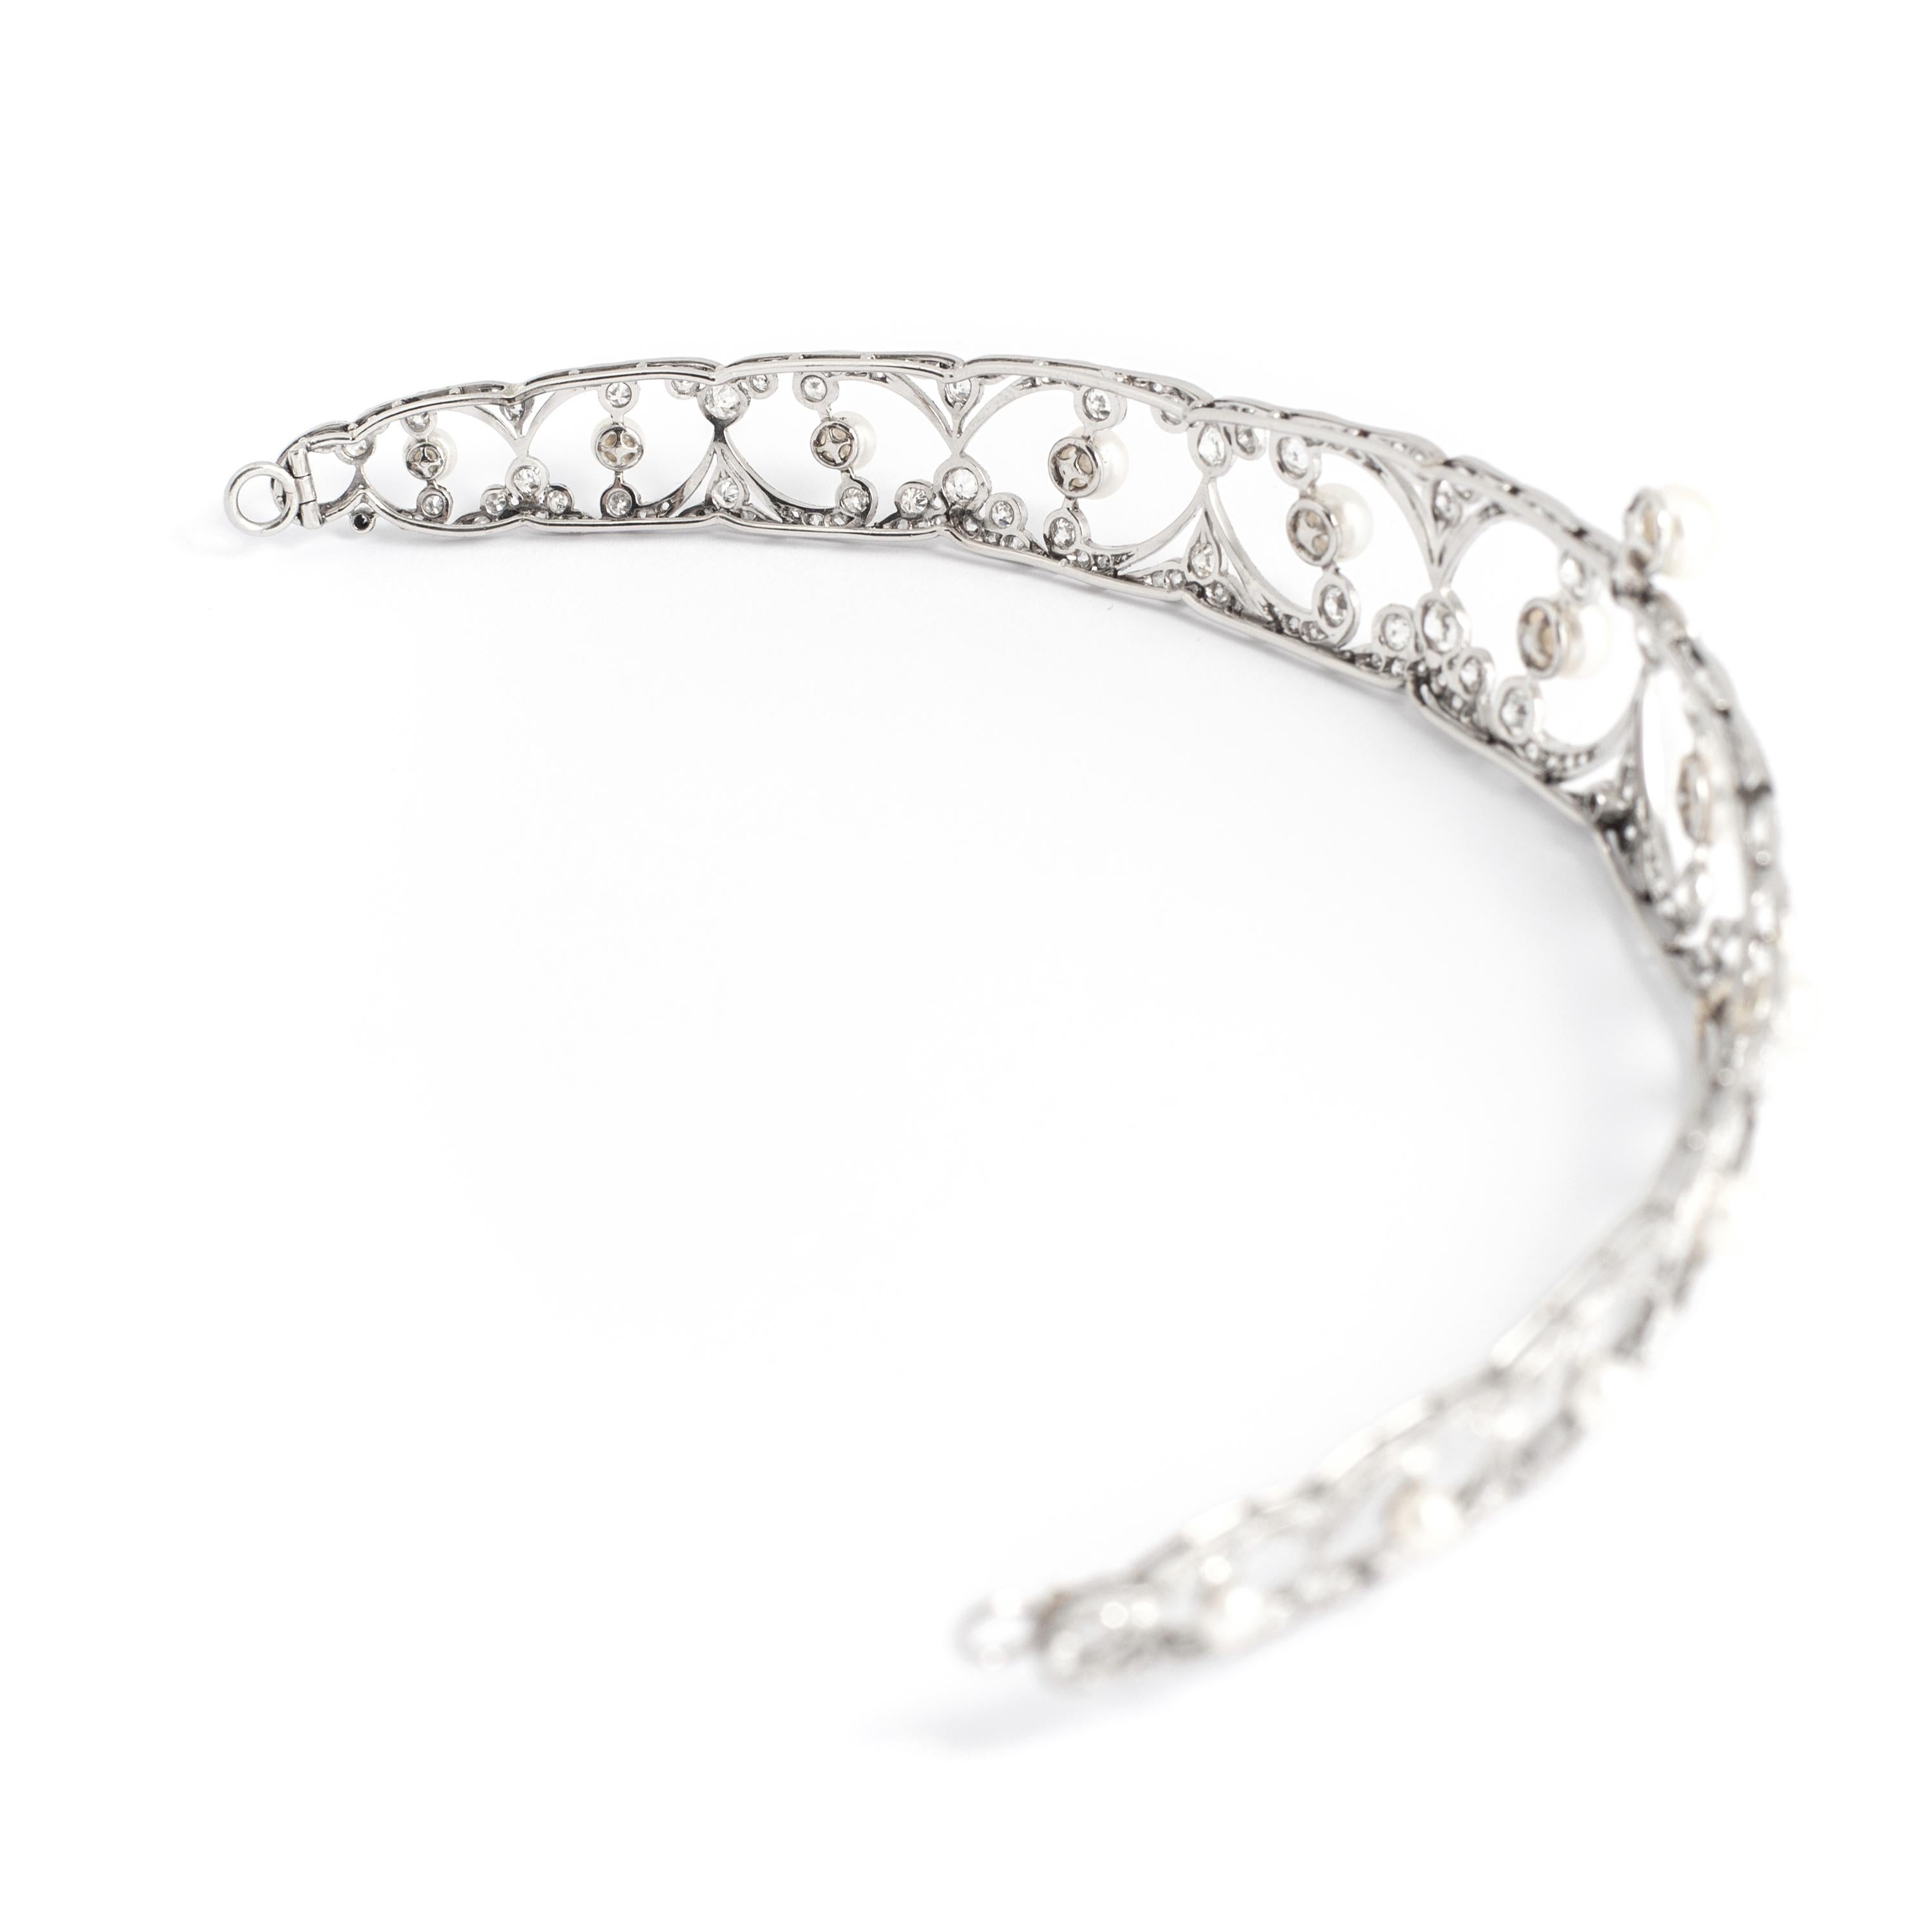 Belle Epoque Tiara diamond and pearl. Total 14.00 carats on platinum and white gold.

Length: 7.48 inches (19.00 centimeters)
Width: 5.41 inches (14.00 centimeters)
Height: 0.87 inch (2.20 centimeters at the highest)